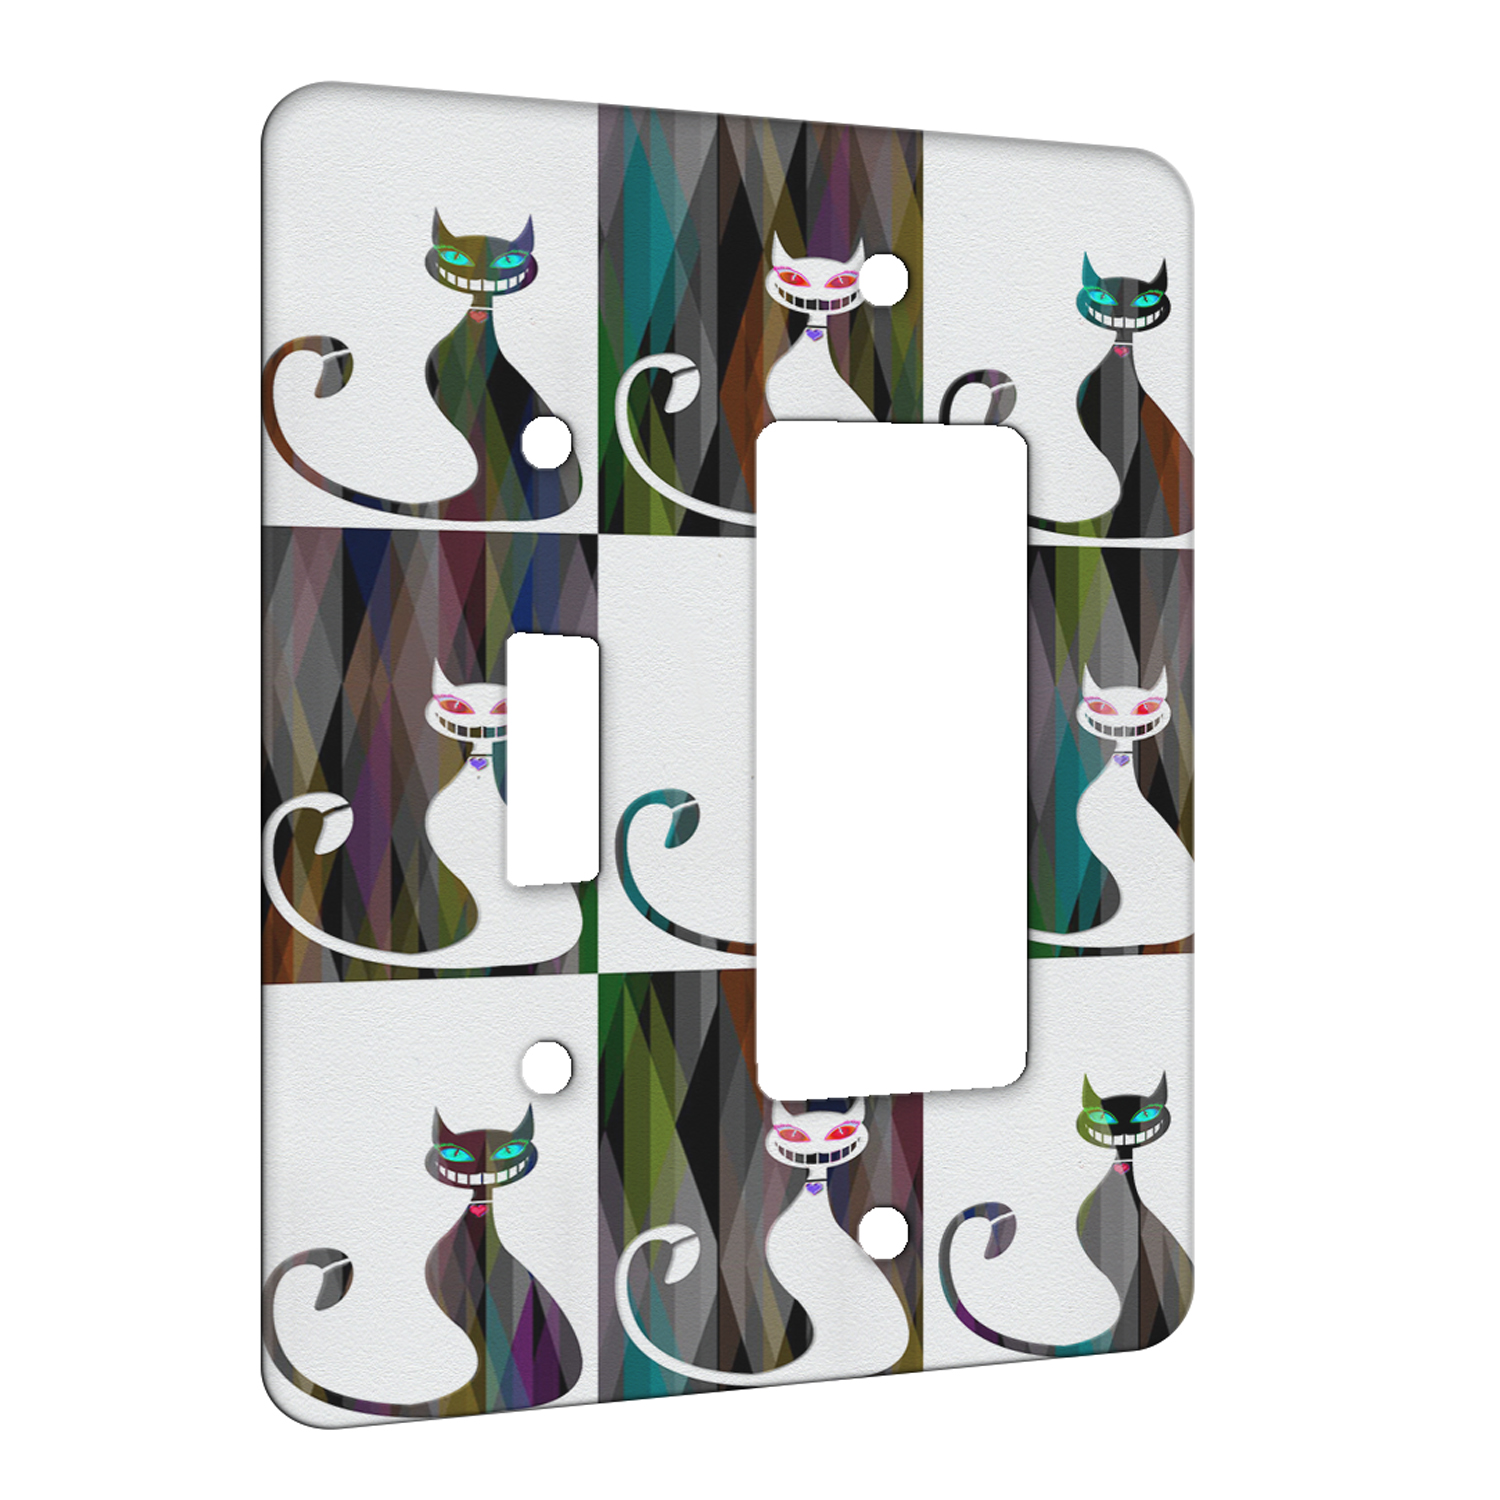 2 Gang Decora/GFCI Elements of Space Pussy Cat Retro Pop Metal Wall Plate